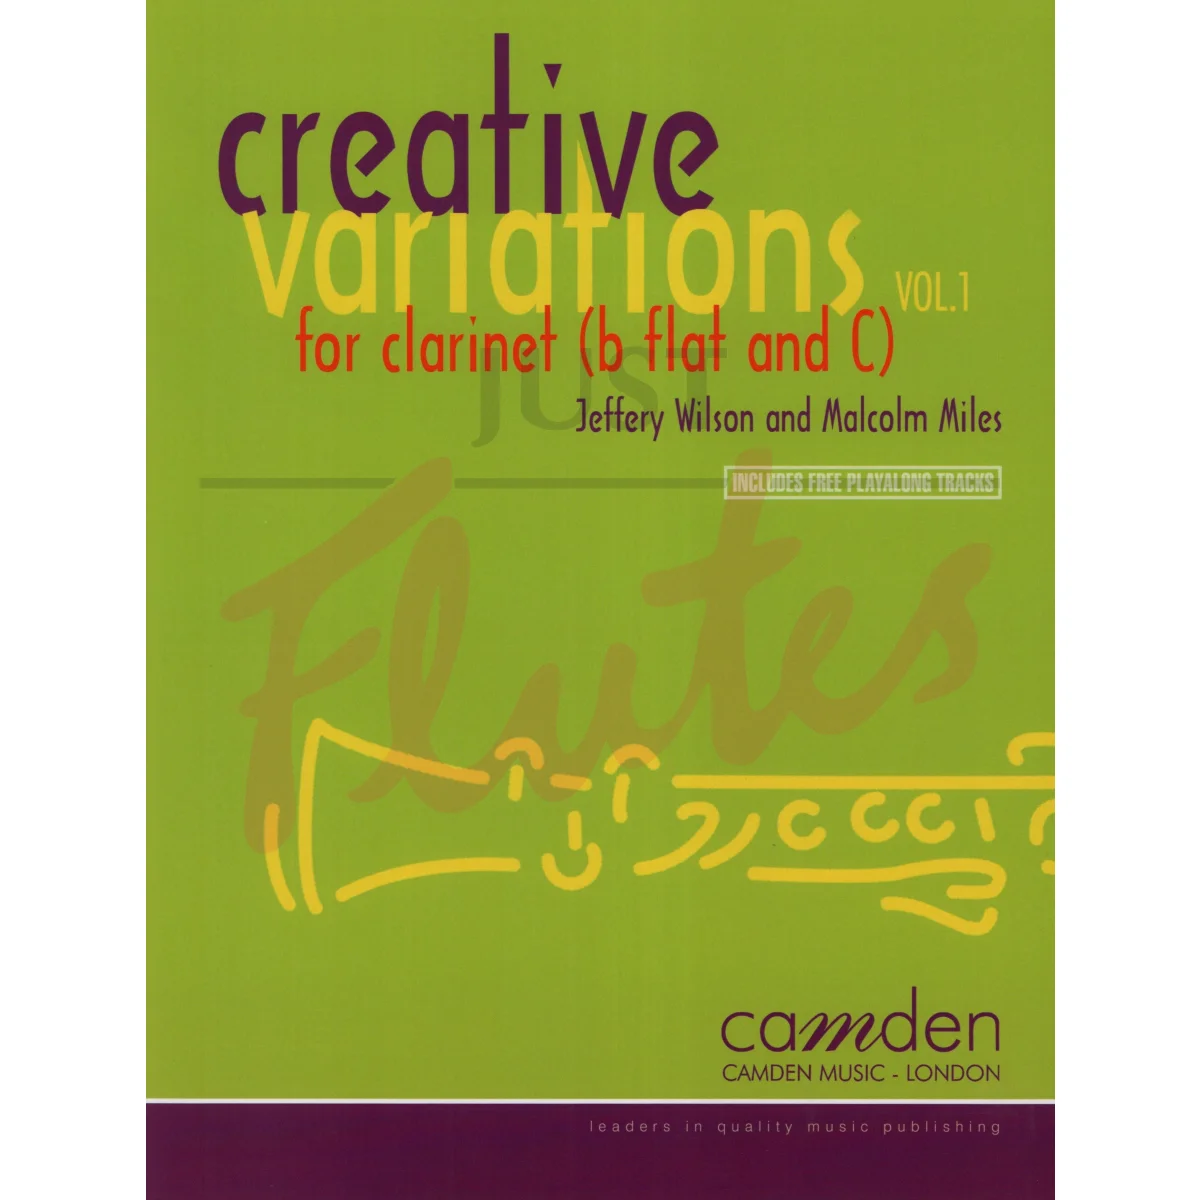 Creative Variations for Clarinet, Vol 1